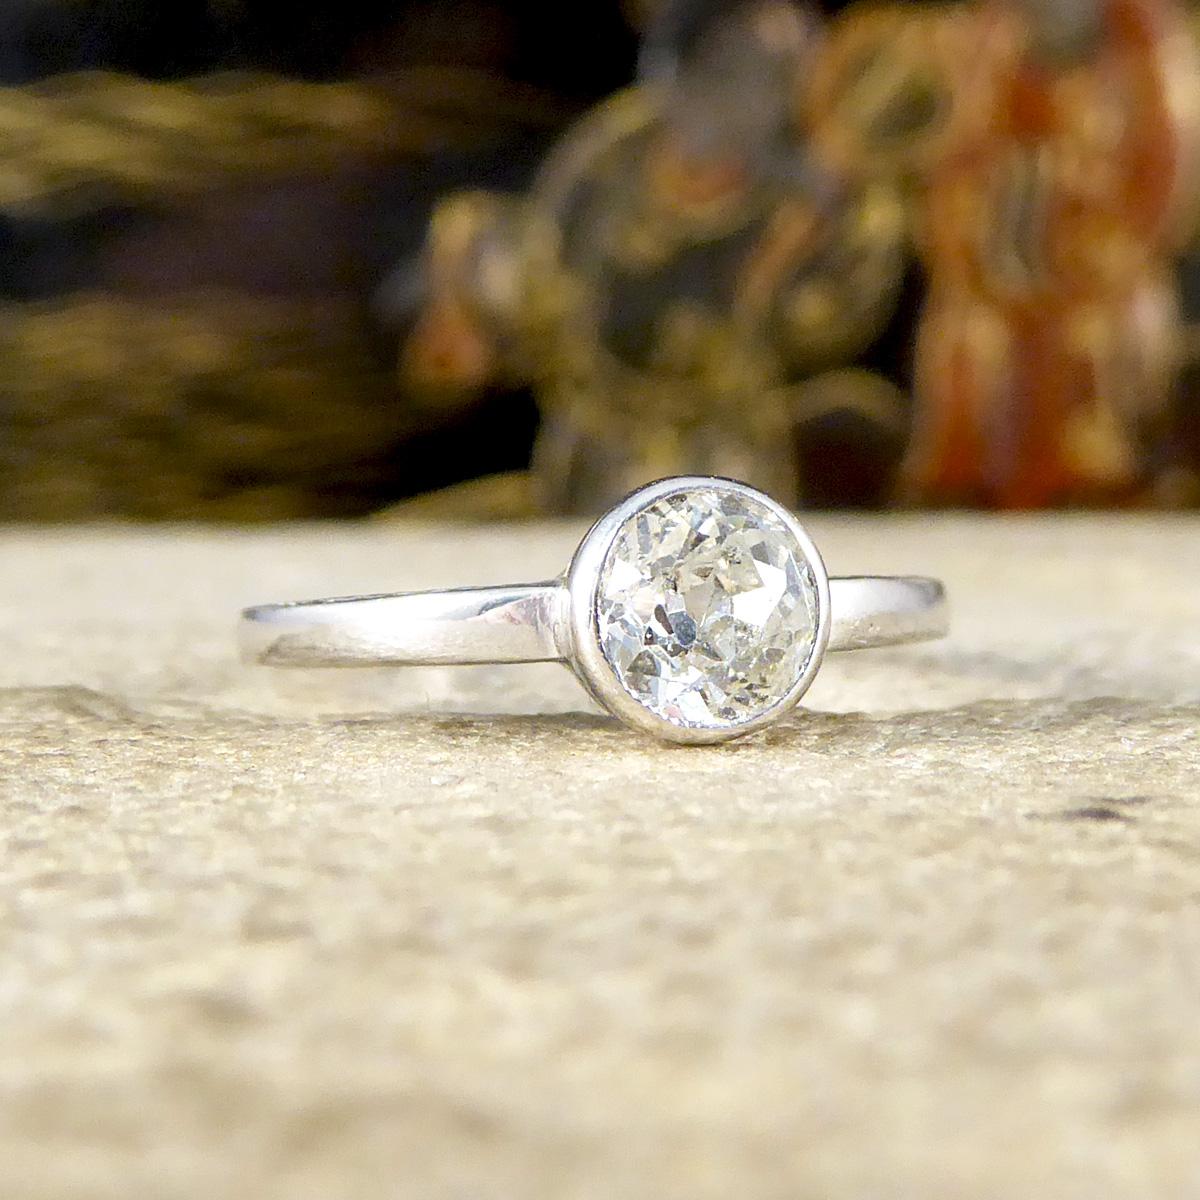 A gorgeous bright and beautiful vintage solitaire ring. Featuring is a 0.50ct Old European Cut Diamond in a rub over collar setting with little inclusions running through the stone giving it so much character. From head on it looks to be plain and